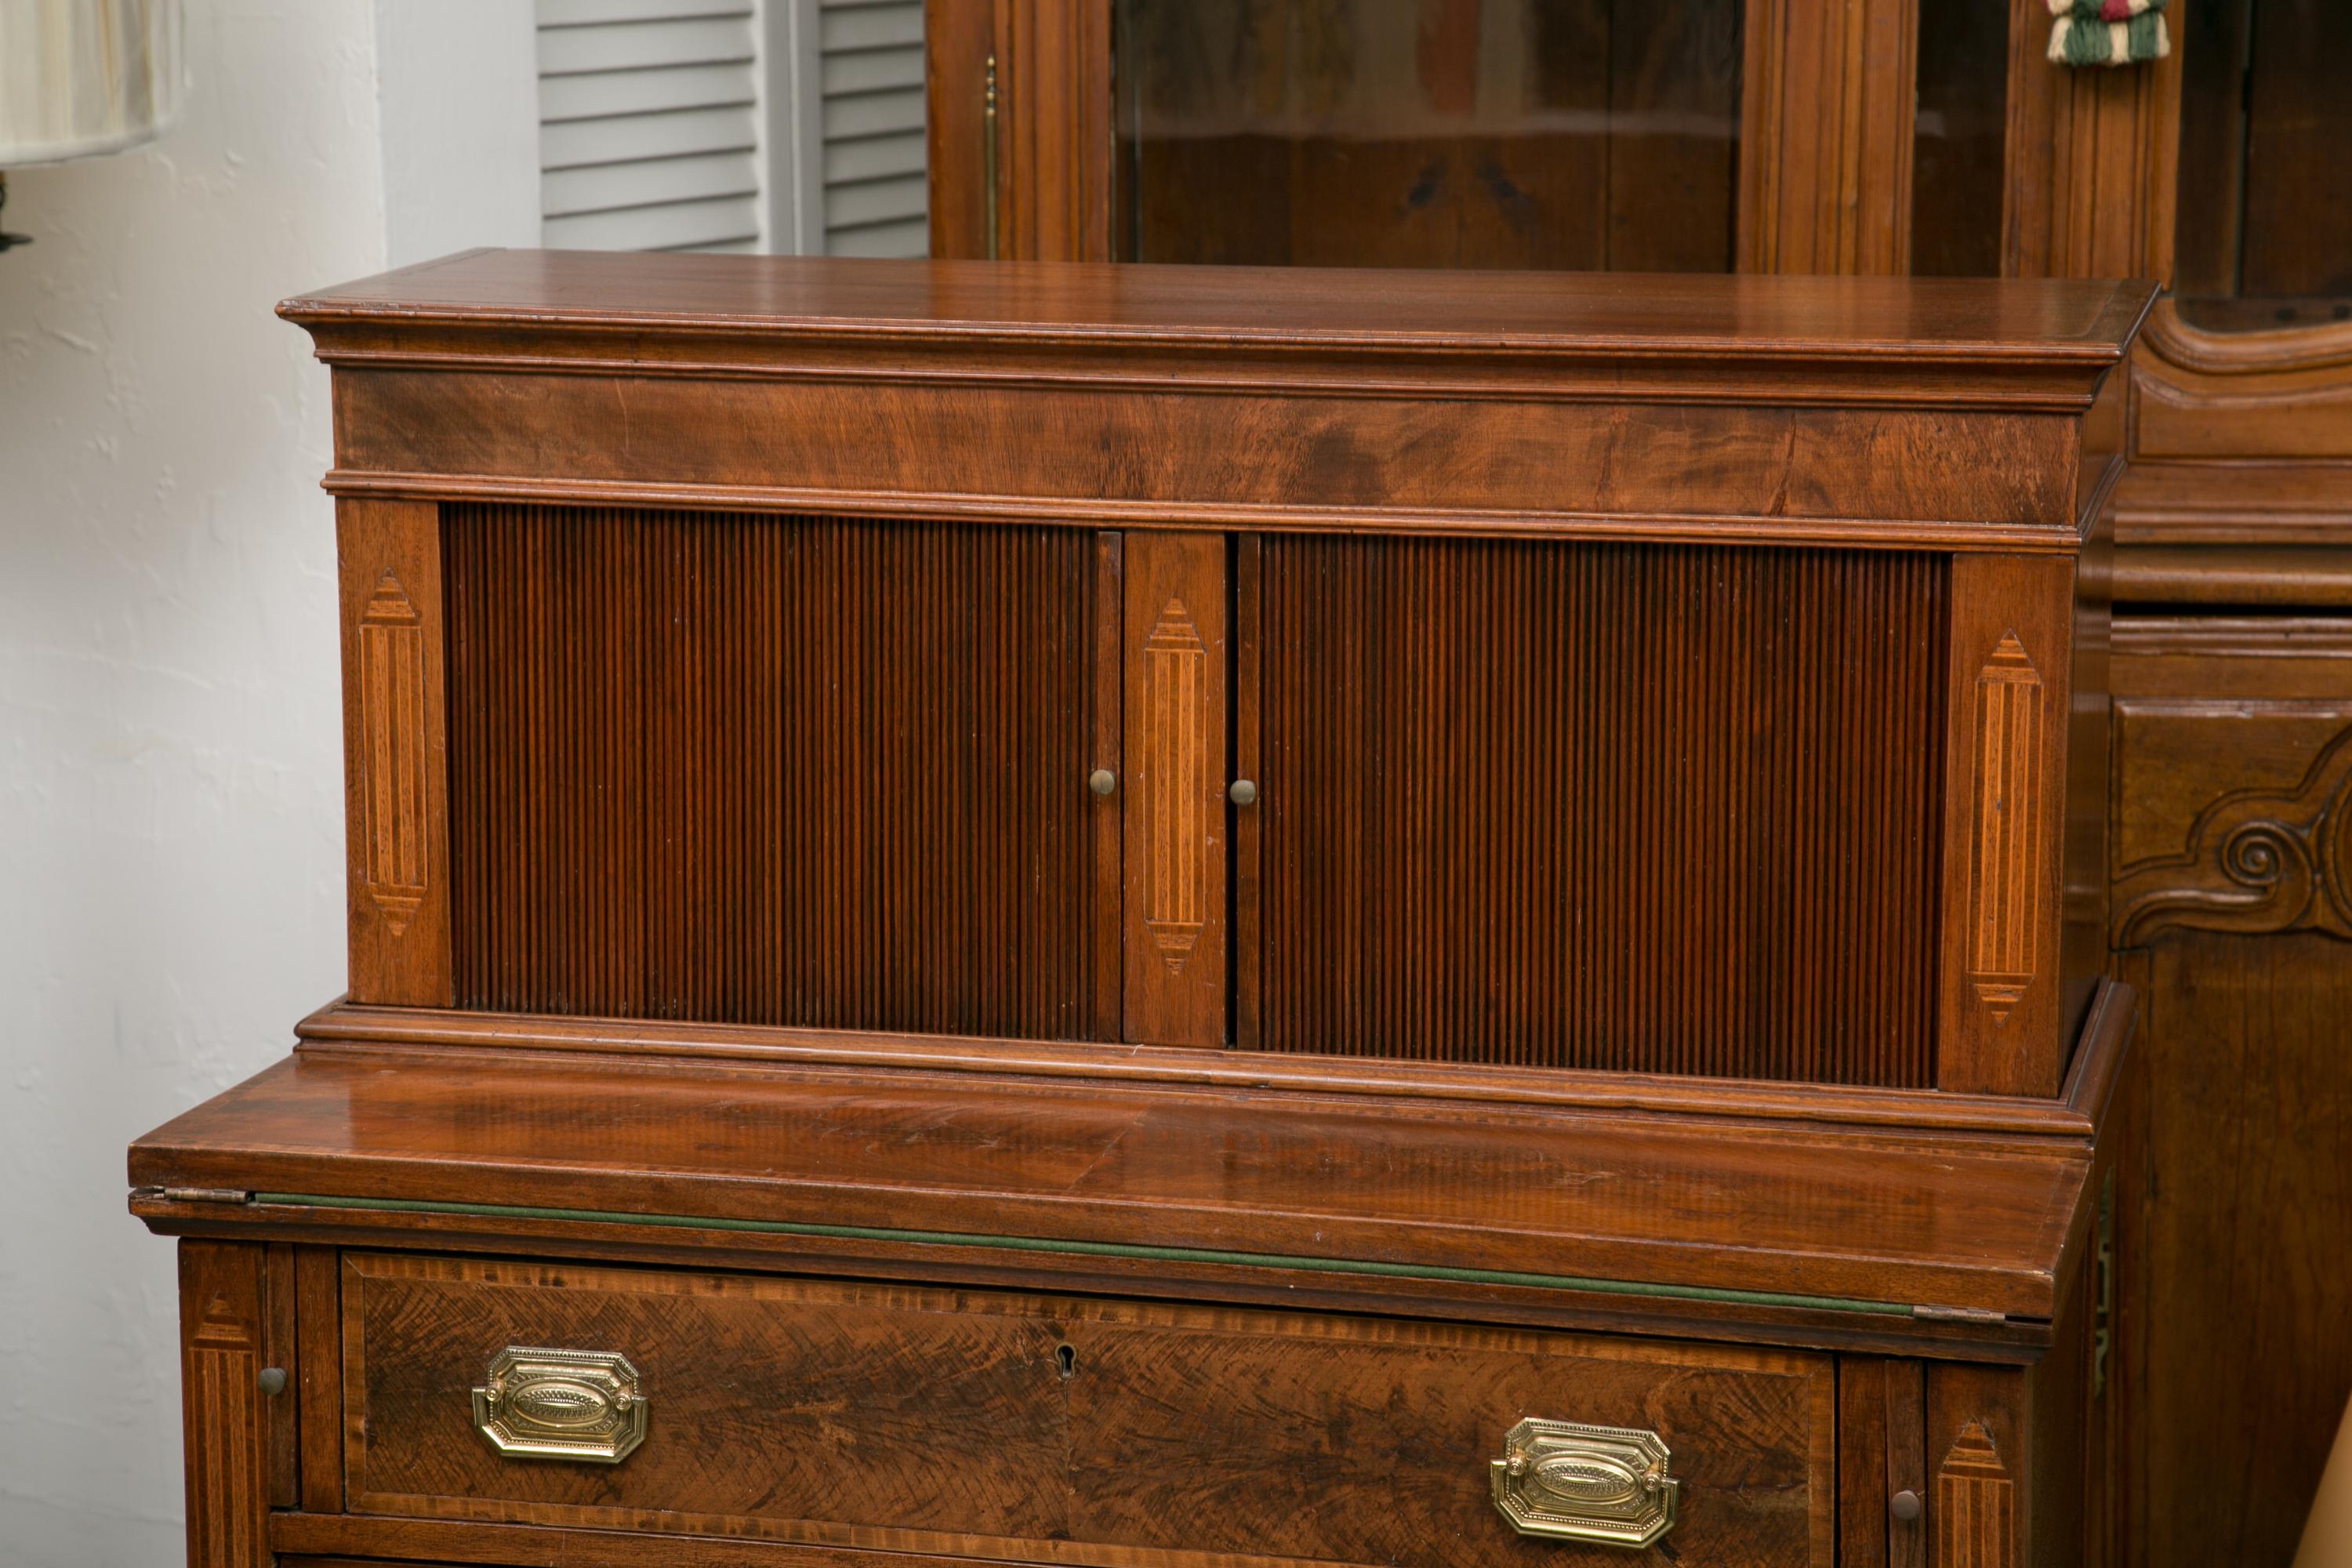 This is a Classic American Federal writing desk with a tambour door on the top section when open it reveals small drawers and document compartments. The bottom section has a fold over writing section with a felt surface and two long drawers below.